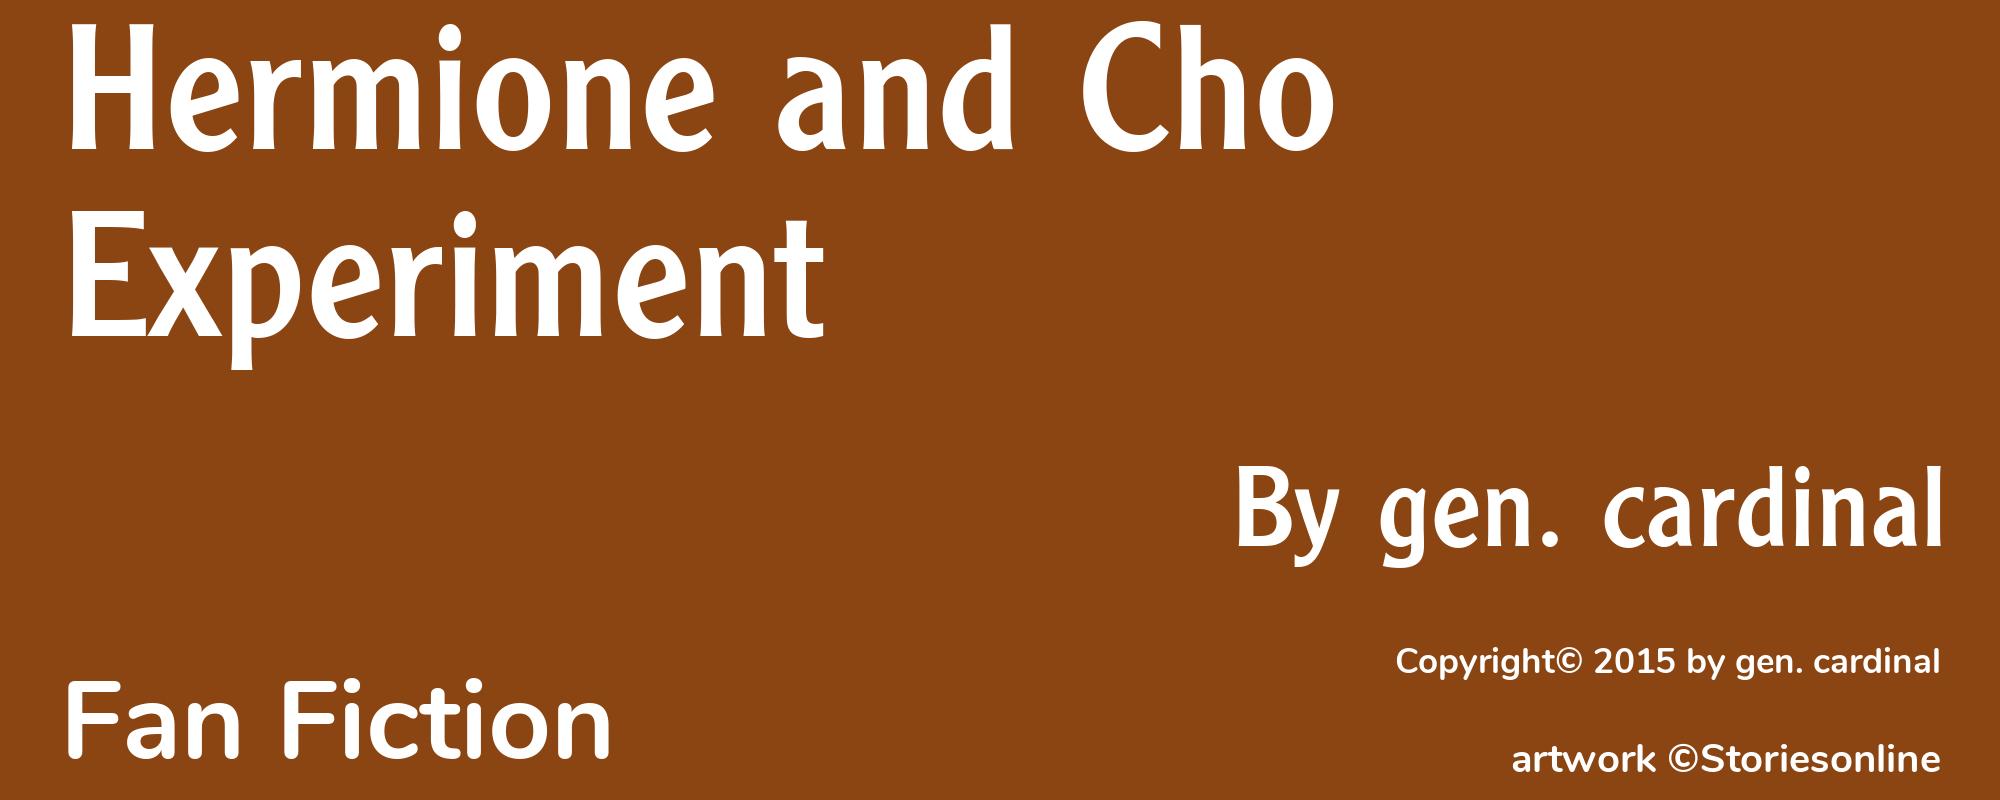 Hermione and Cho Experiment - Cover